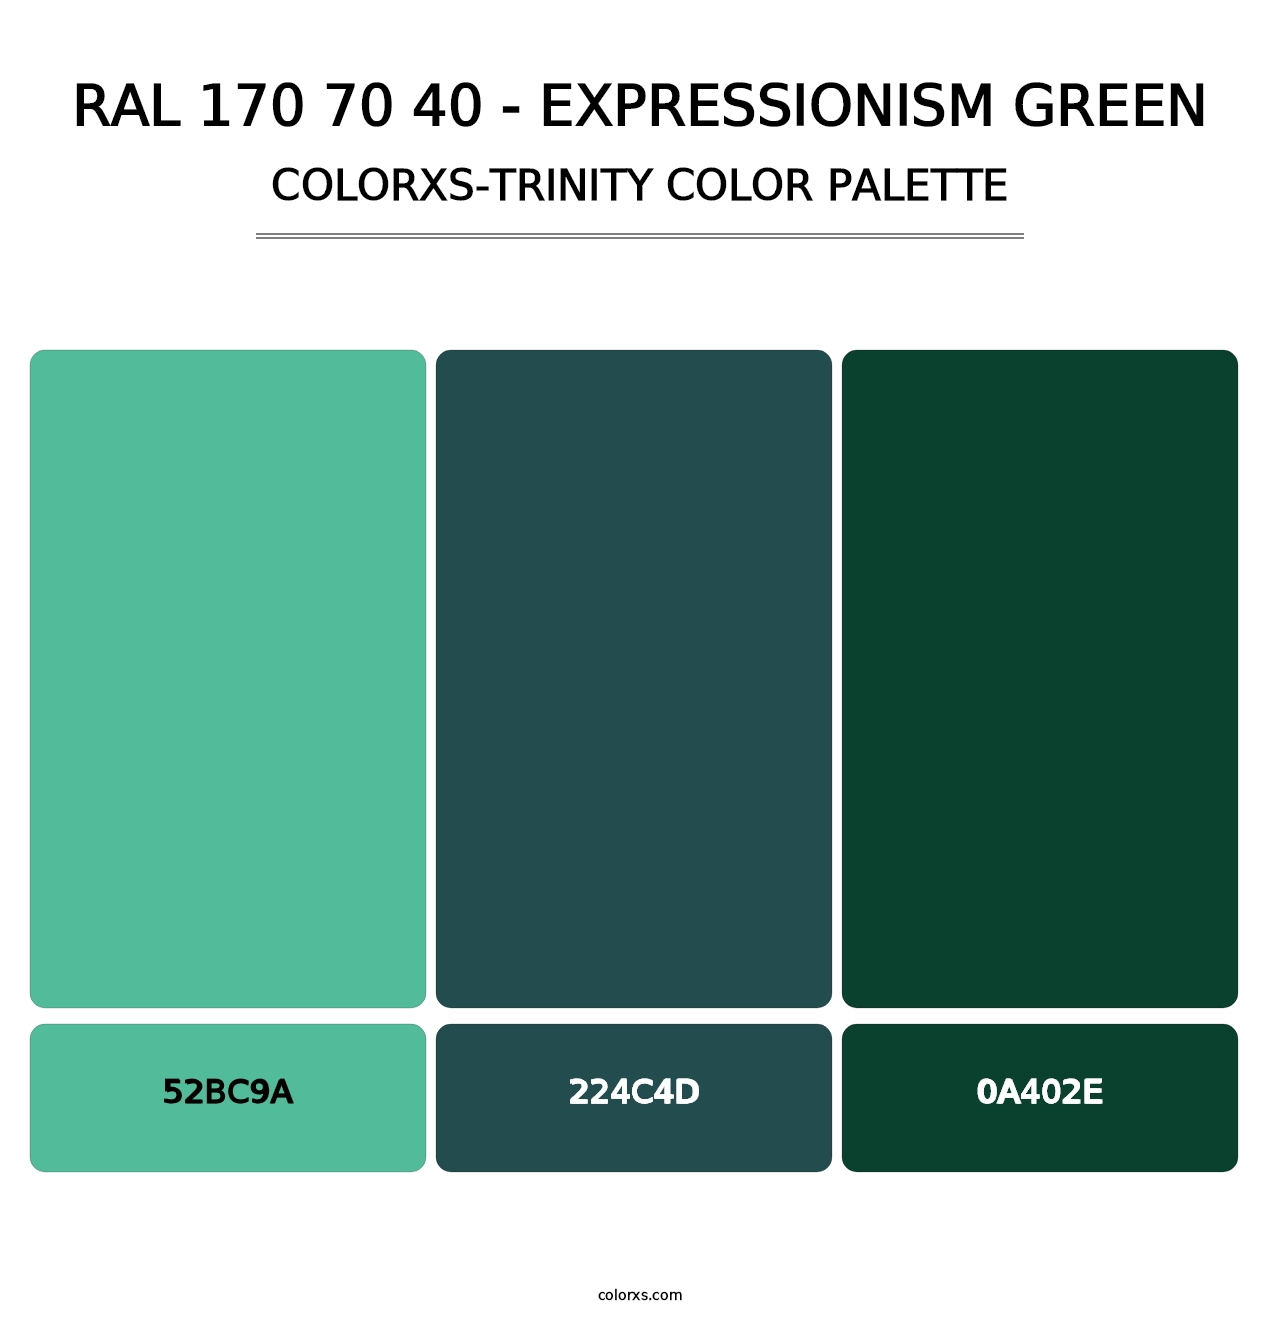 RAL 170 70 40 - Expressionism Green - Colorxs Trinity Palette